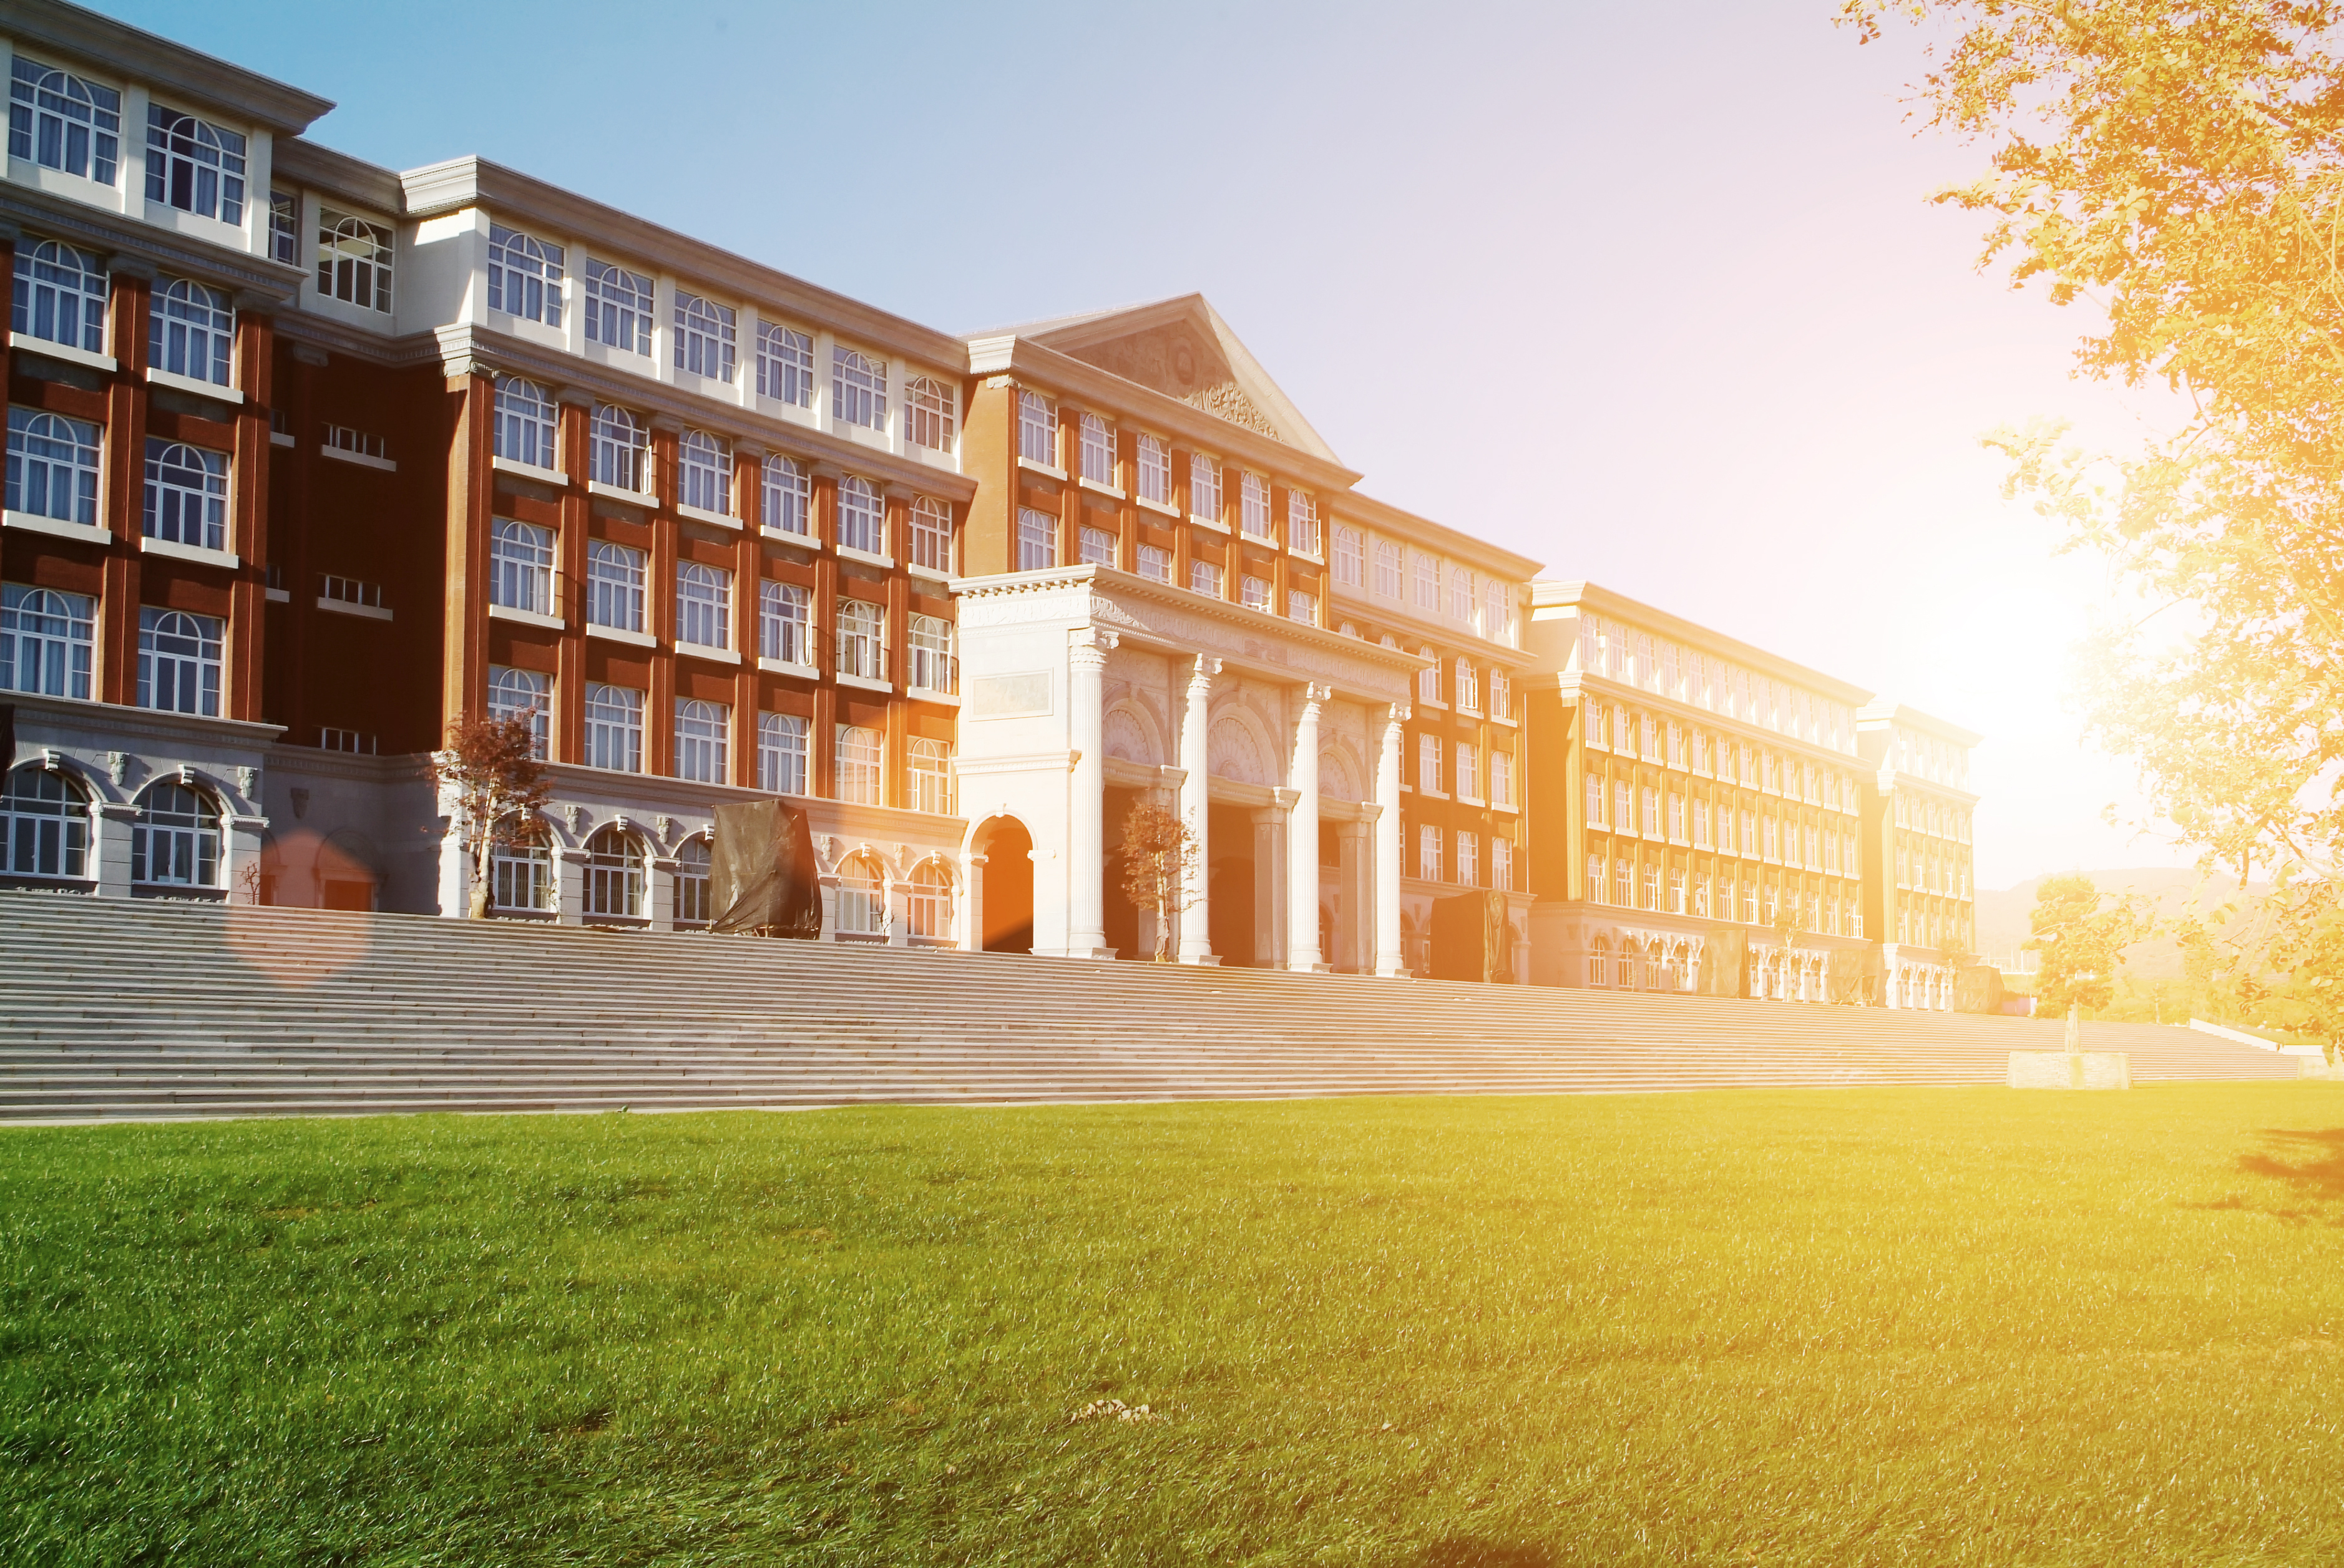 Hall building in college. | Source: Shutterstock